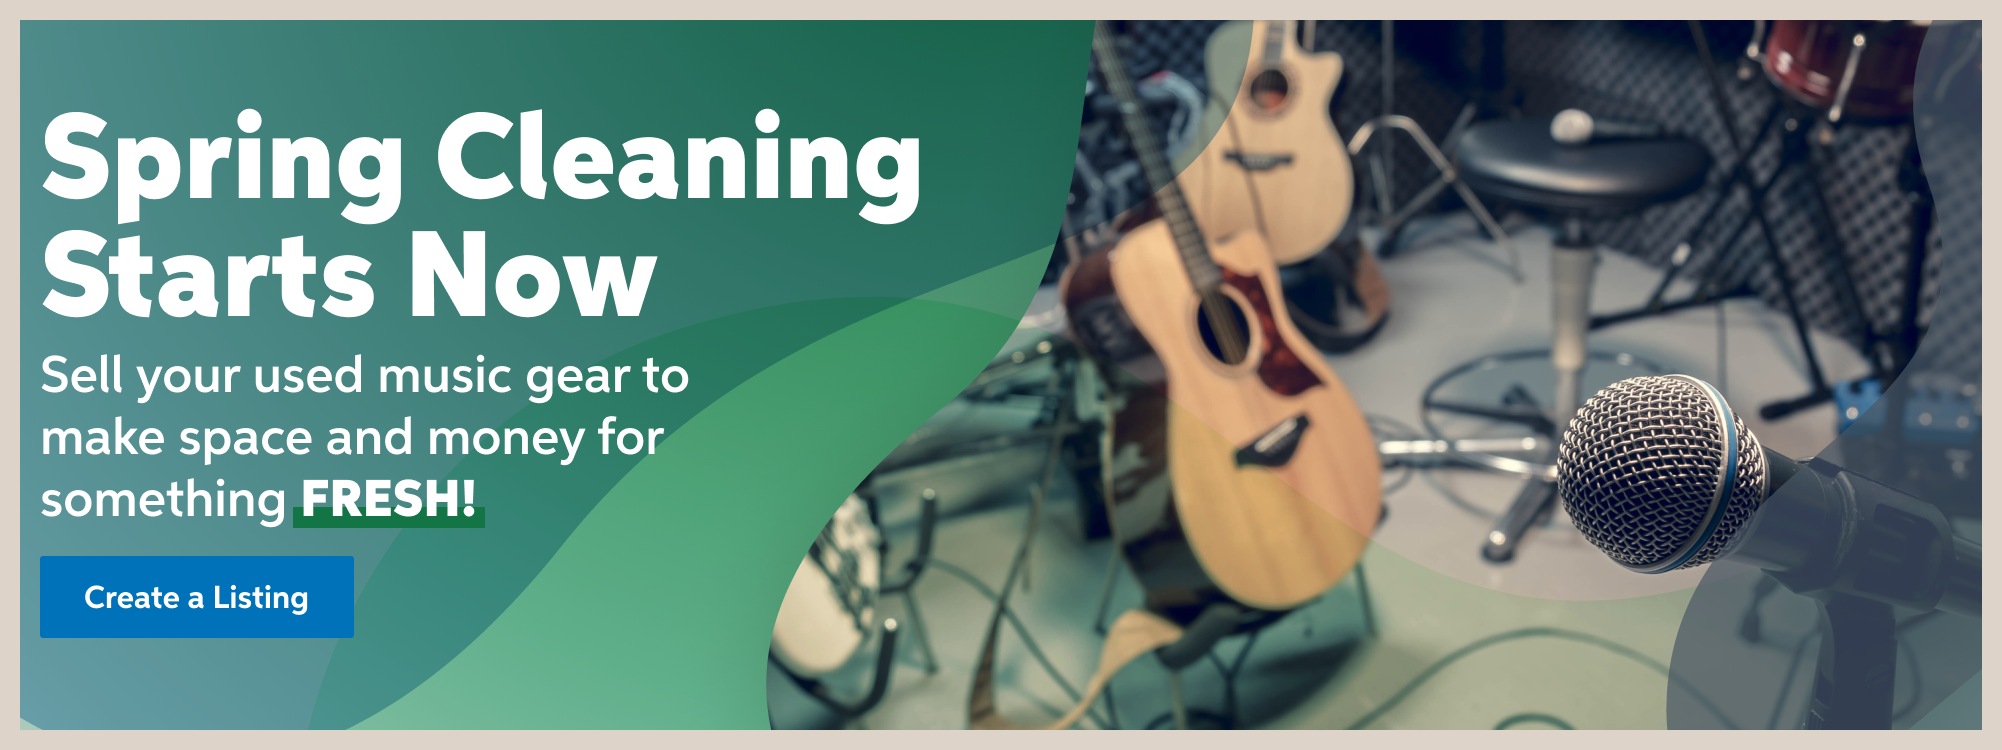 Spring Cleaning Starts Now. Sell your used music gear to make space and money for something FRESH! Click to create a listing.